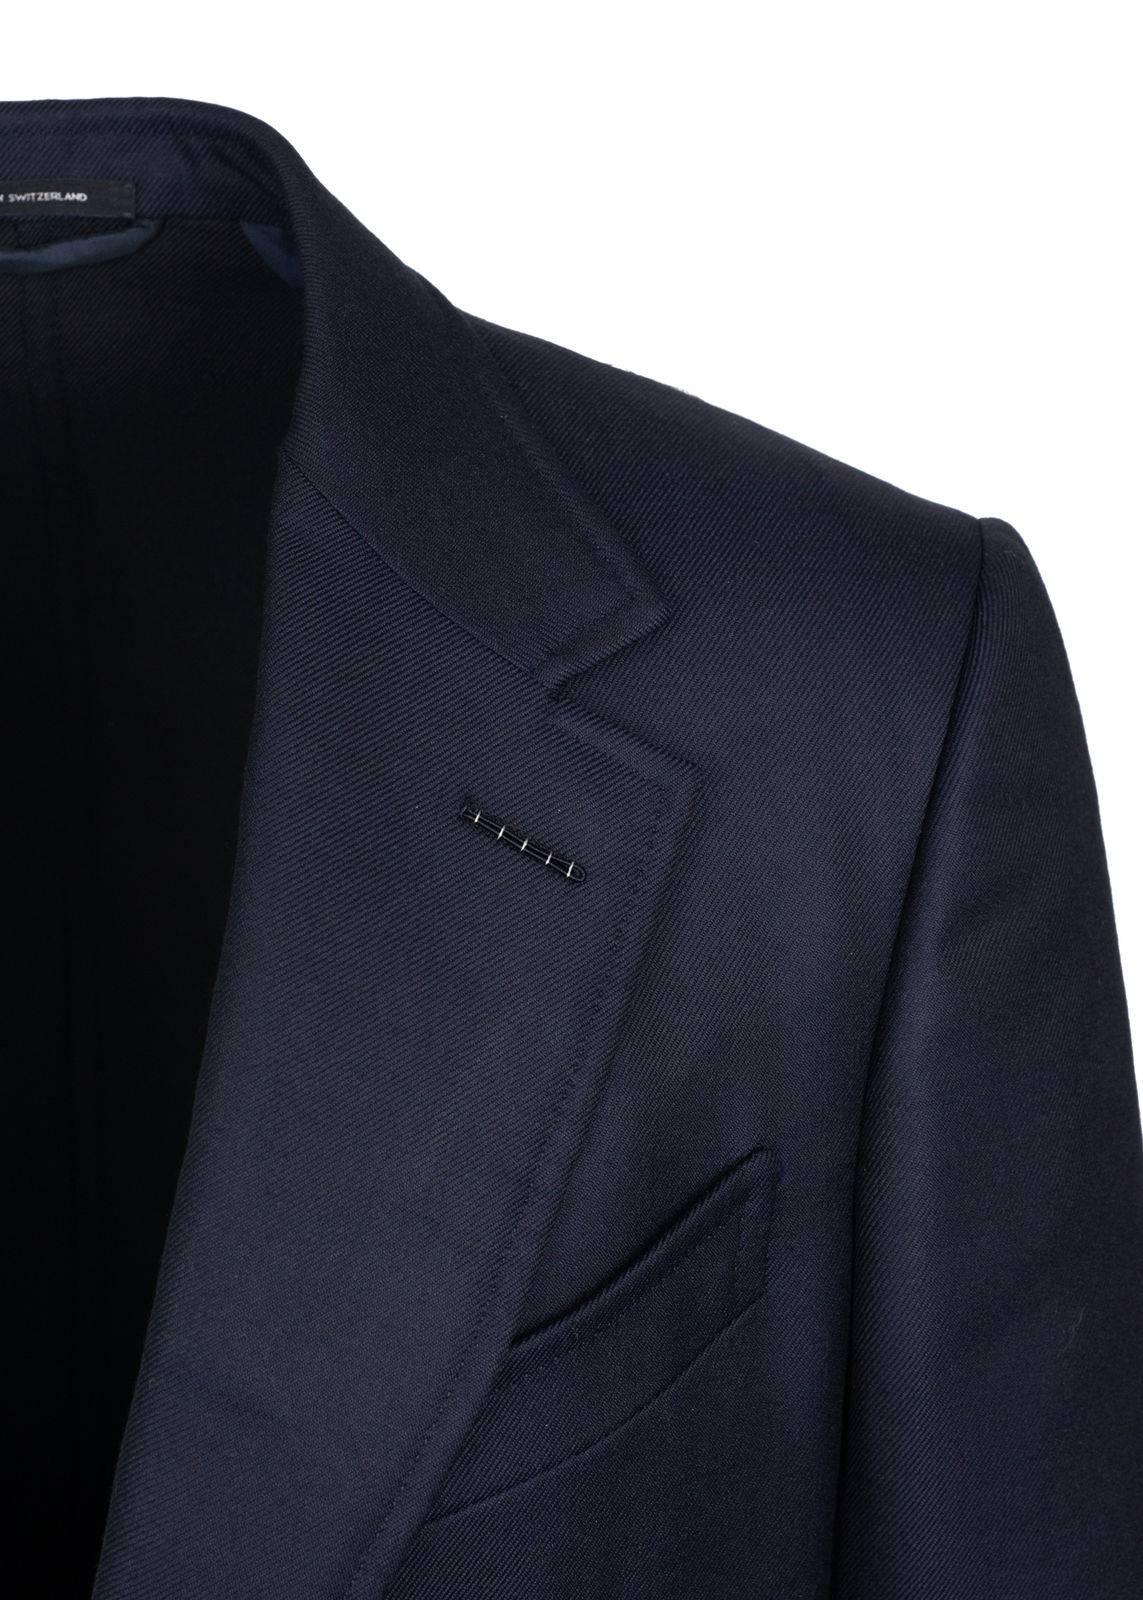 Tom Ford Shelton Navy Wool Blazer Sports Jacket 48R 38R ret $3750 In Excellent Condition For Sale In Brooklyn, NY